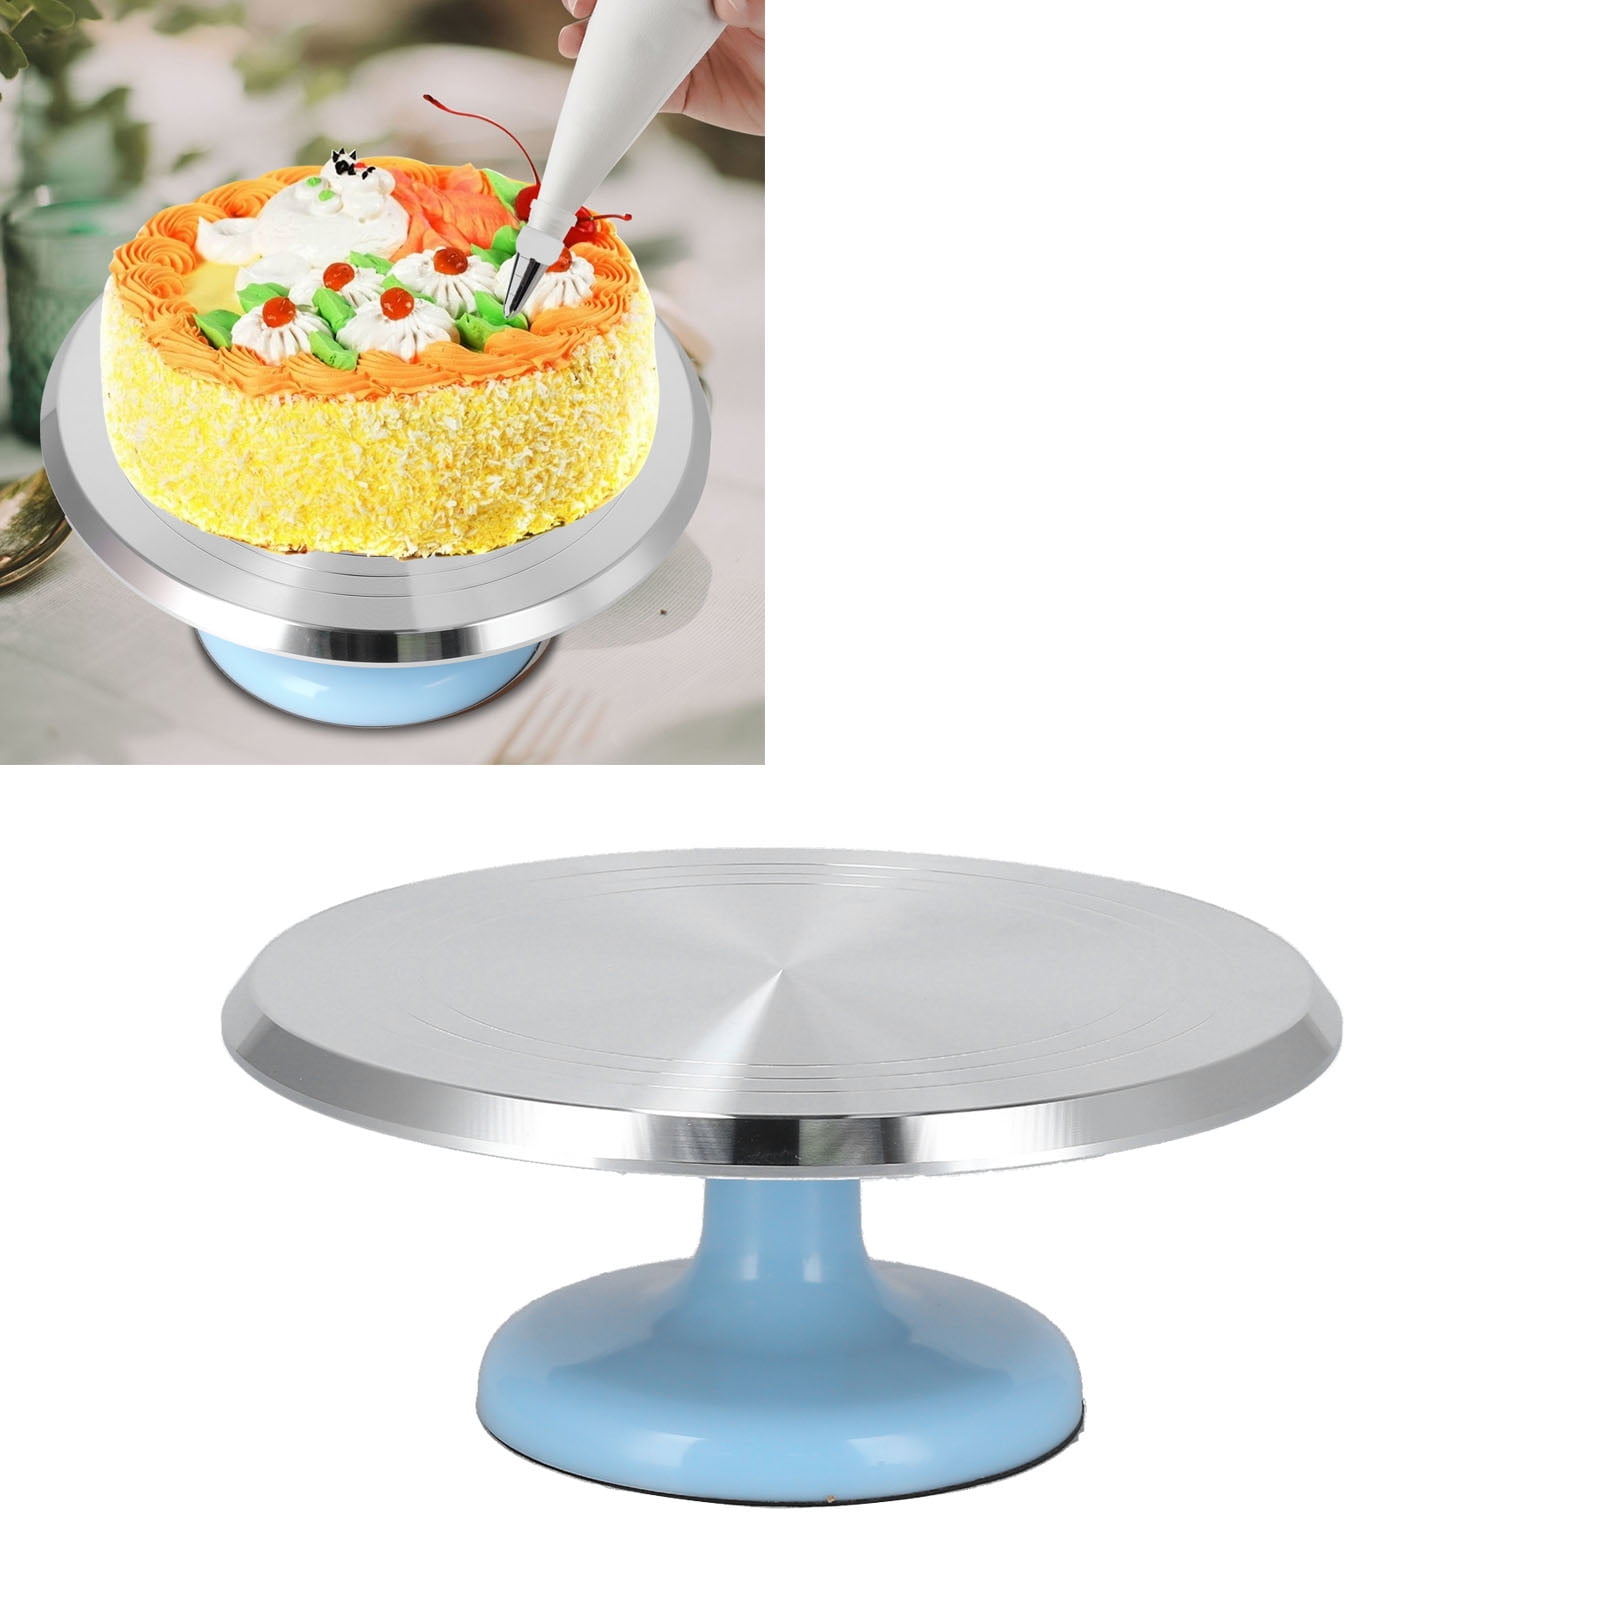 Professional Cake Turntable DECORATING ROTATING STAND Revolving Icing Baking Kit 